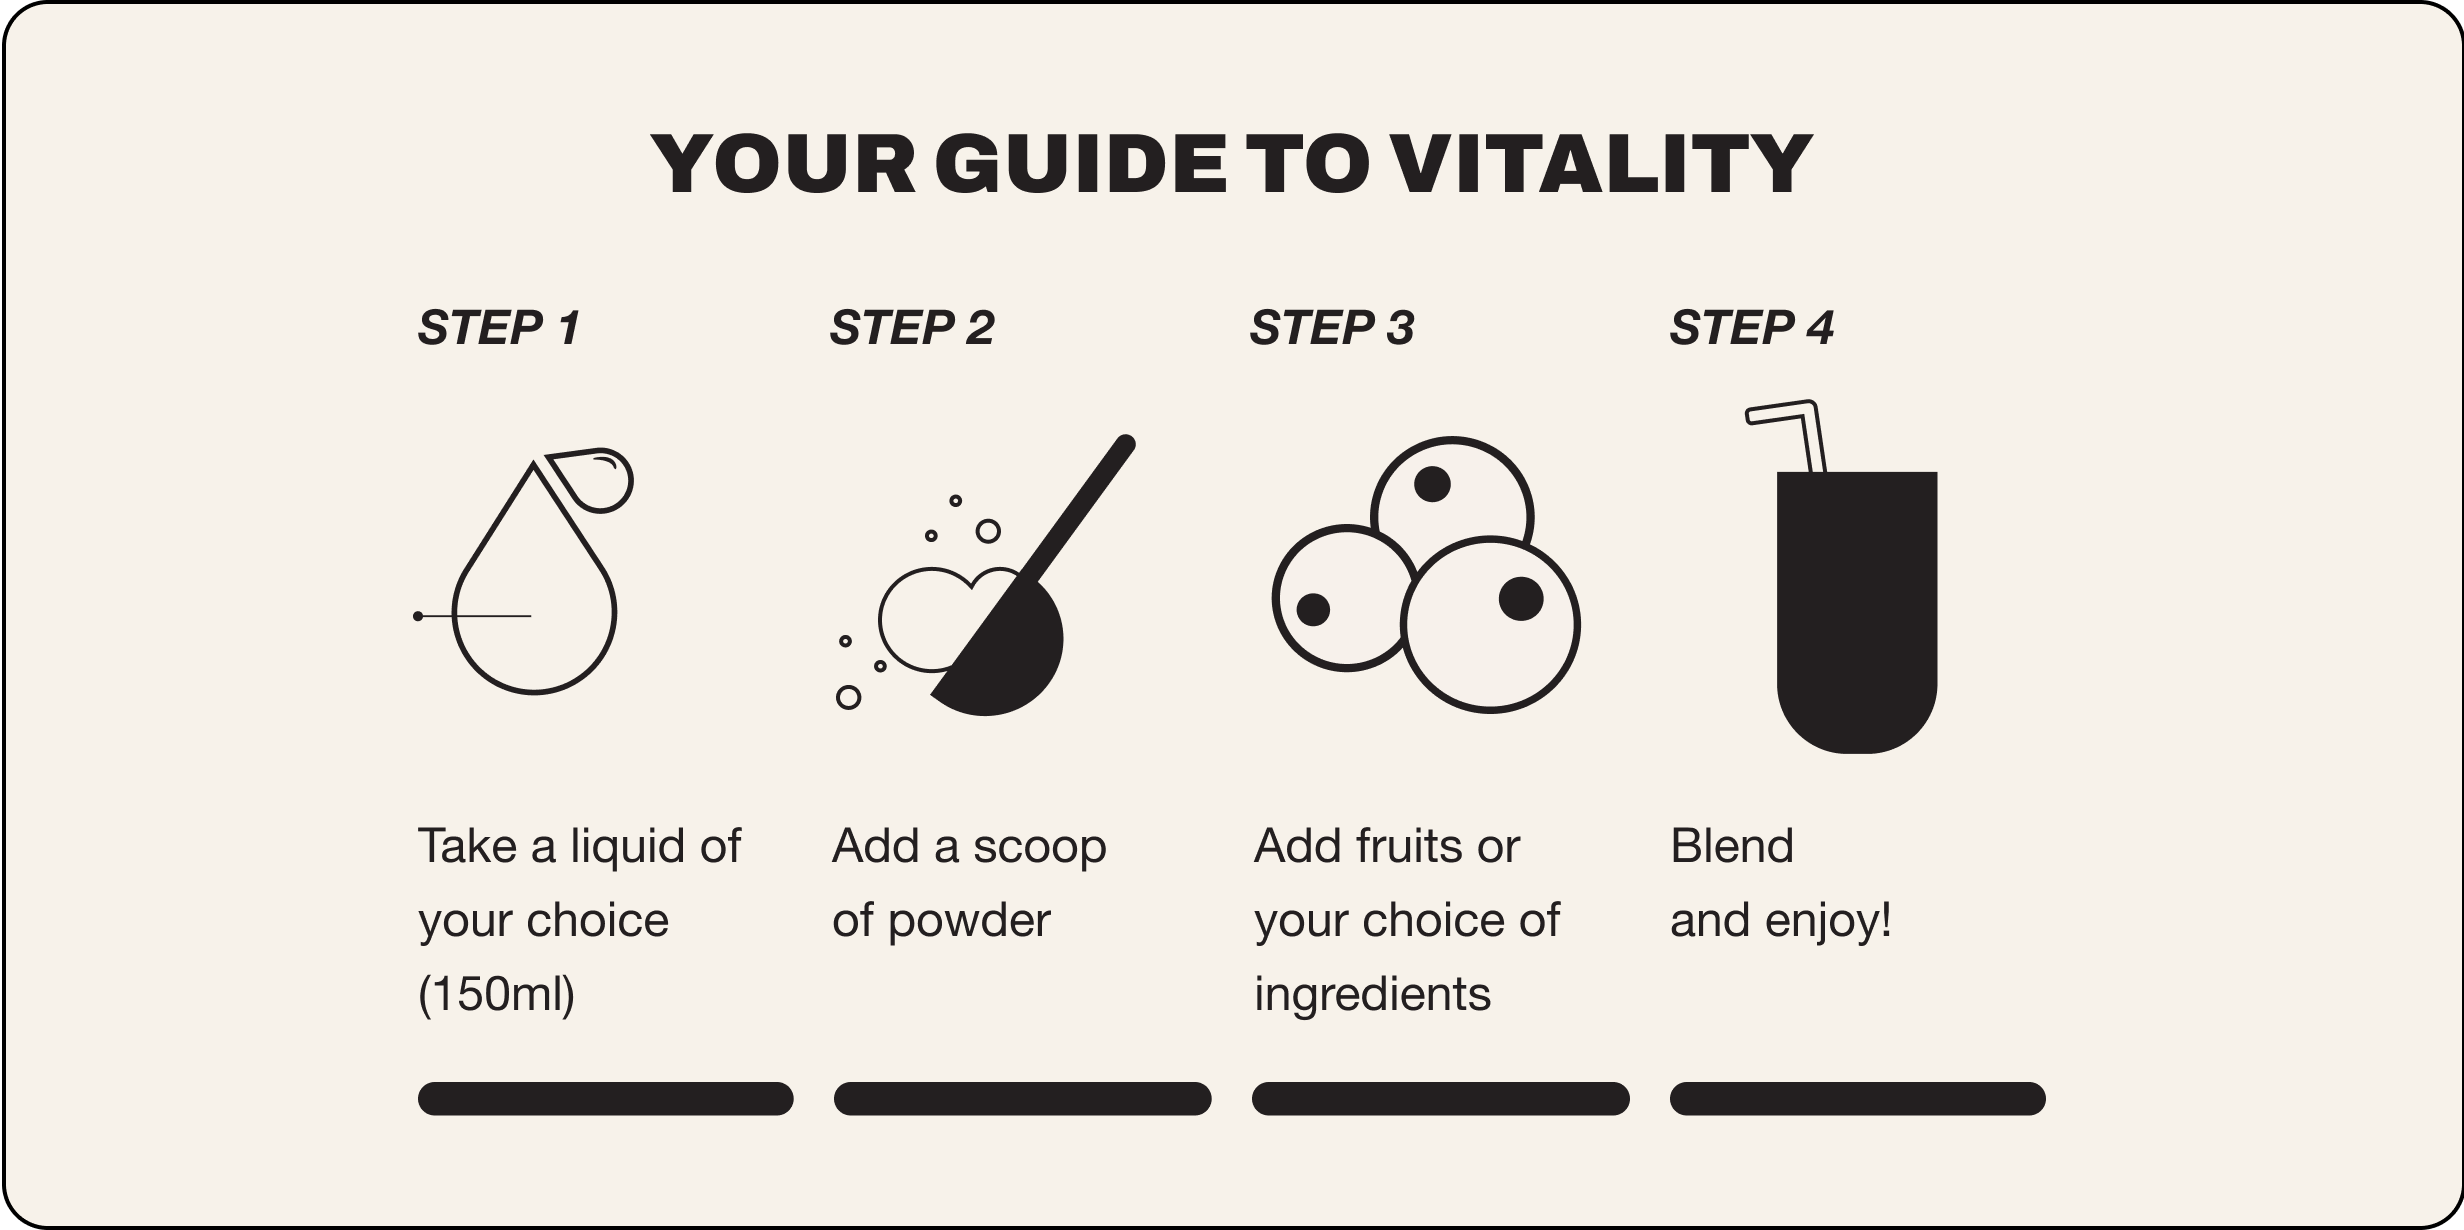 Your guide to Vitality. Step 1: Take a liquid of your choice (150ml). Step 2: Add a scoop of powder. Step 3: Add fruits or your choice of ingredients. Step 4: Blend and enjoy!